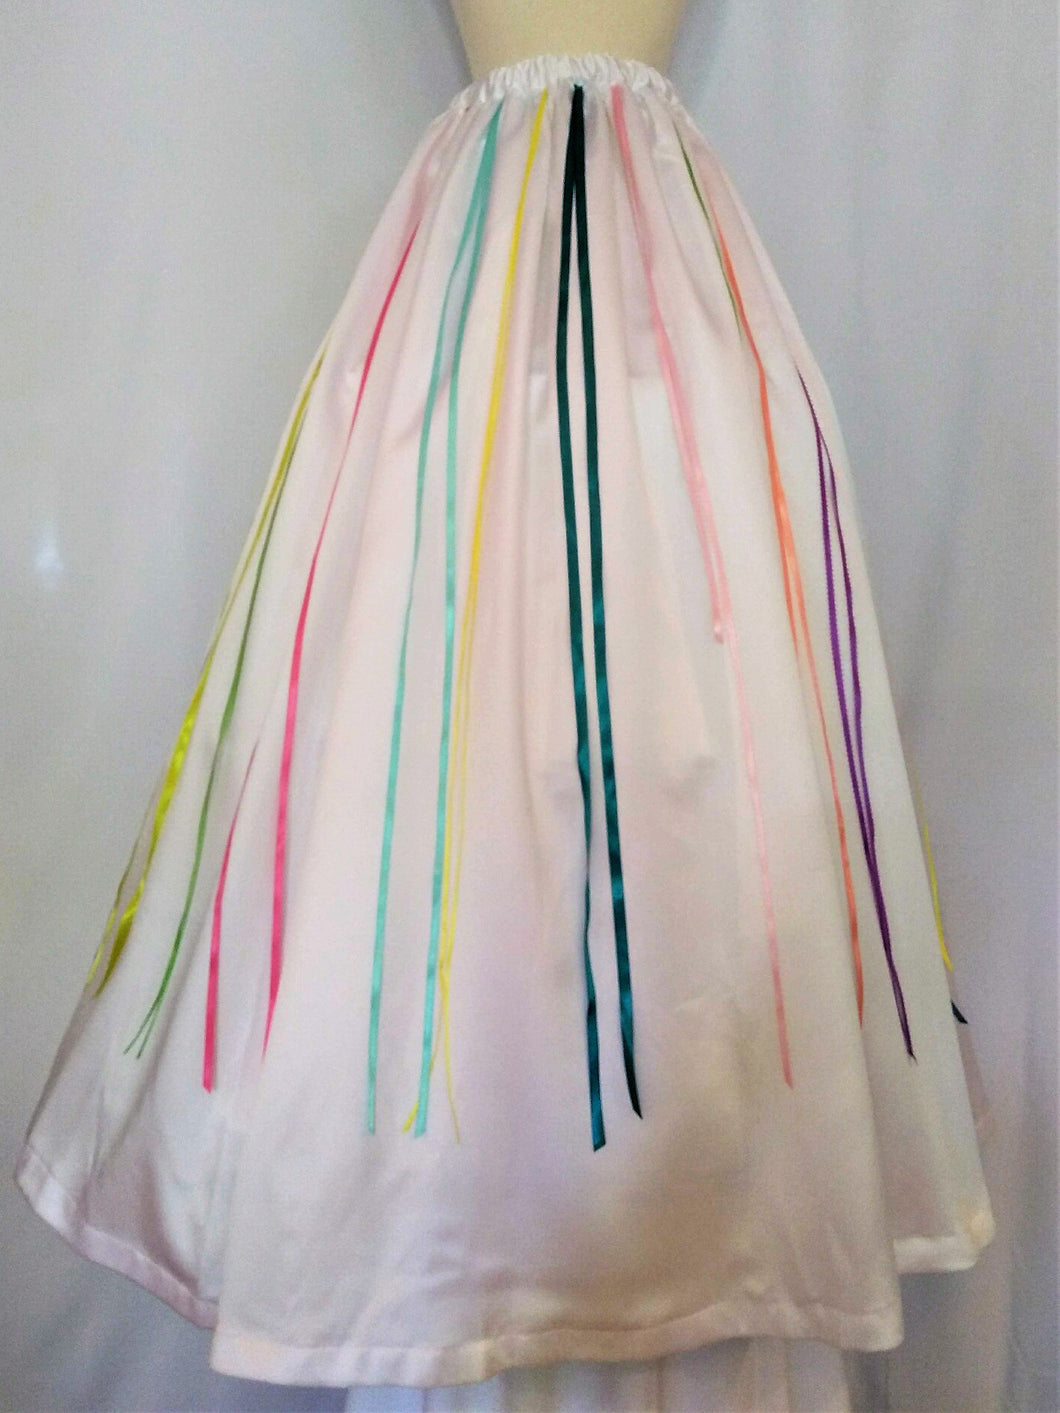 White Satin Skirt with Colorful Ribbons